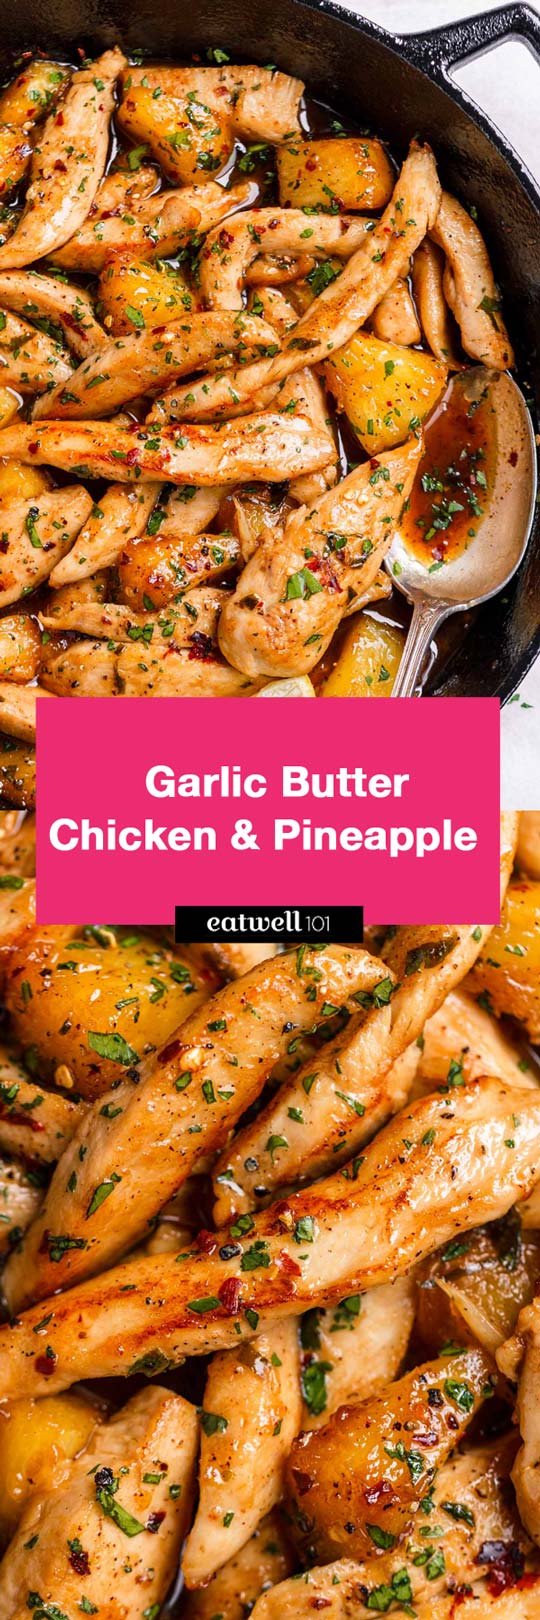 Garlic Butter Chicken Pineapple Skillet - This pineapple chicken is SO TENDER and JUICY bursting with savory sweet flavor!